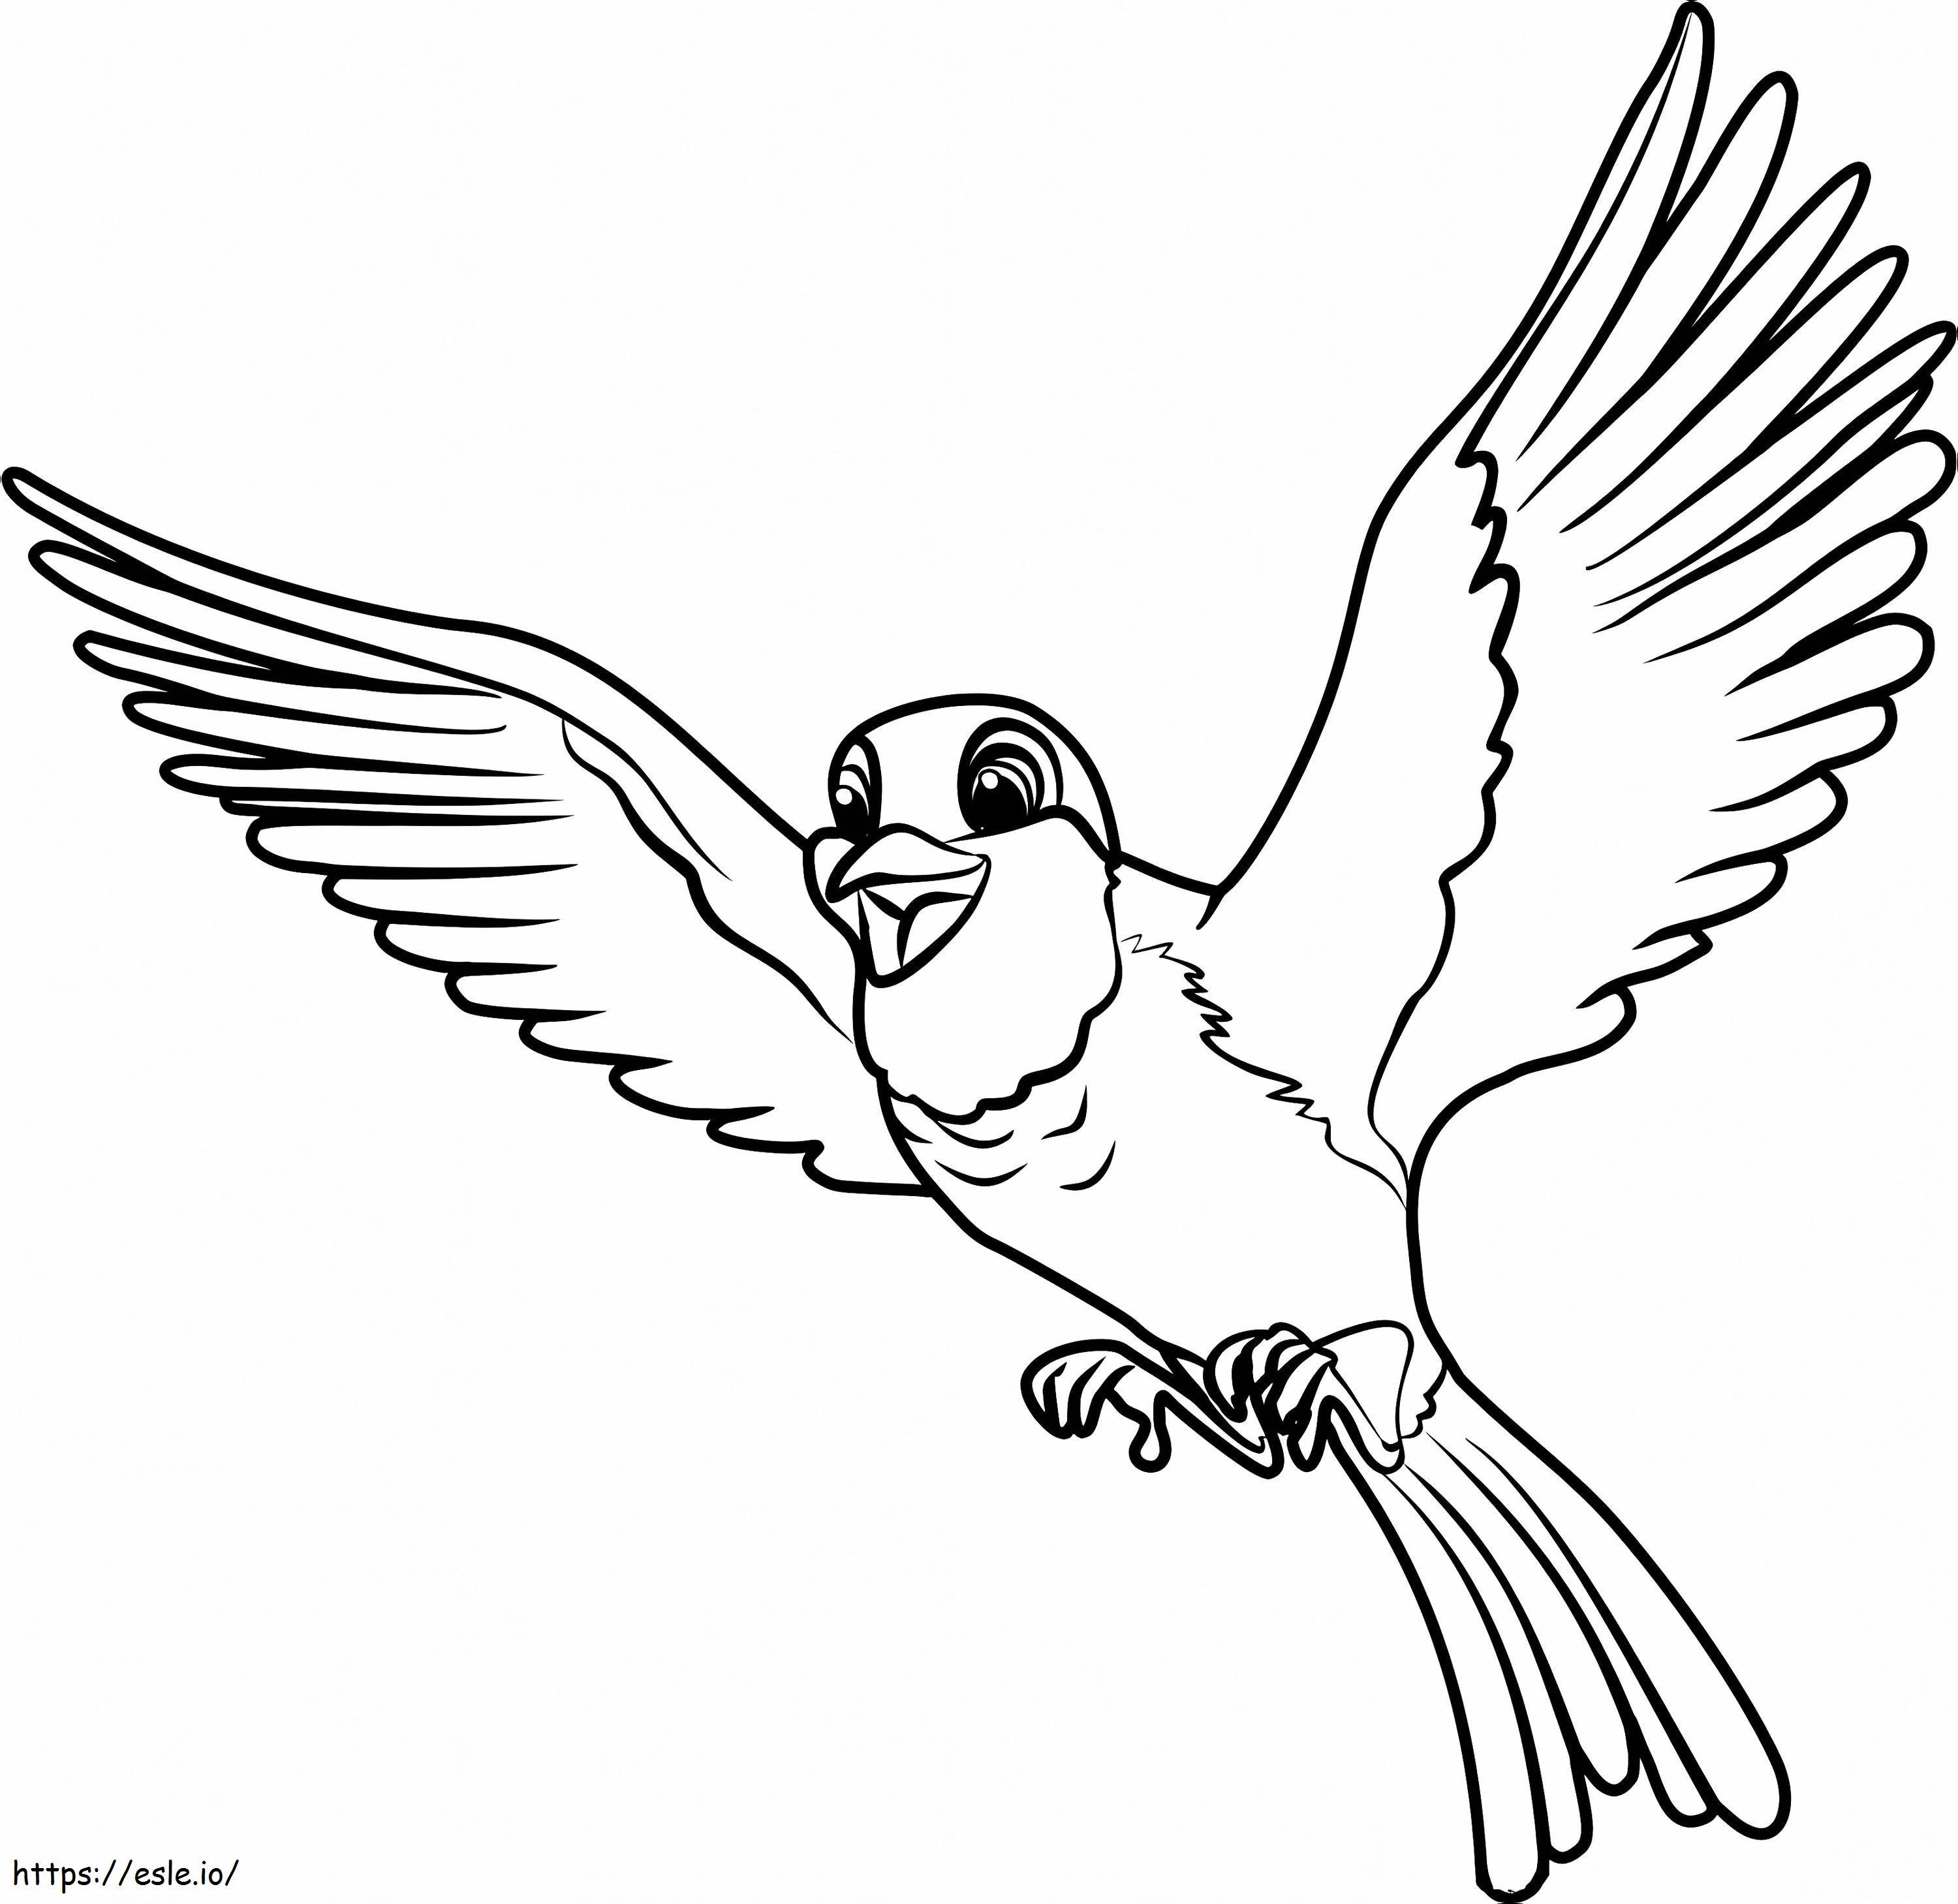 1531450977 Robin Flying A4 coloring page